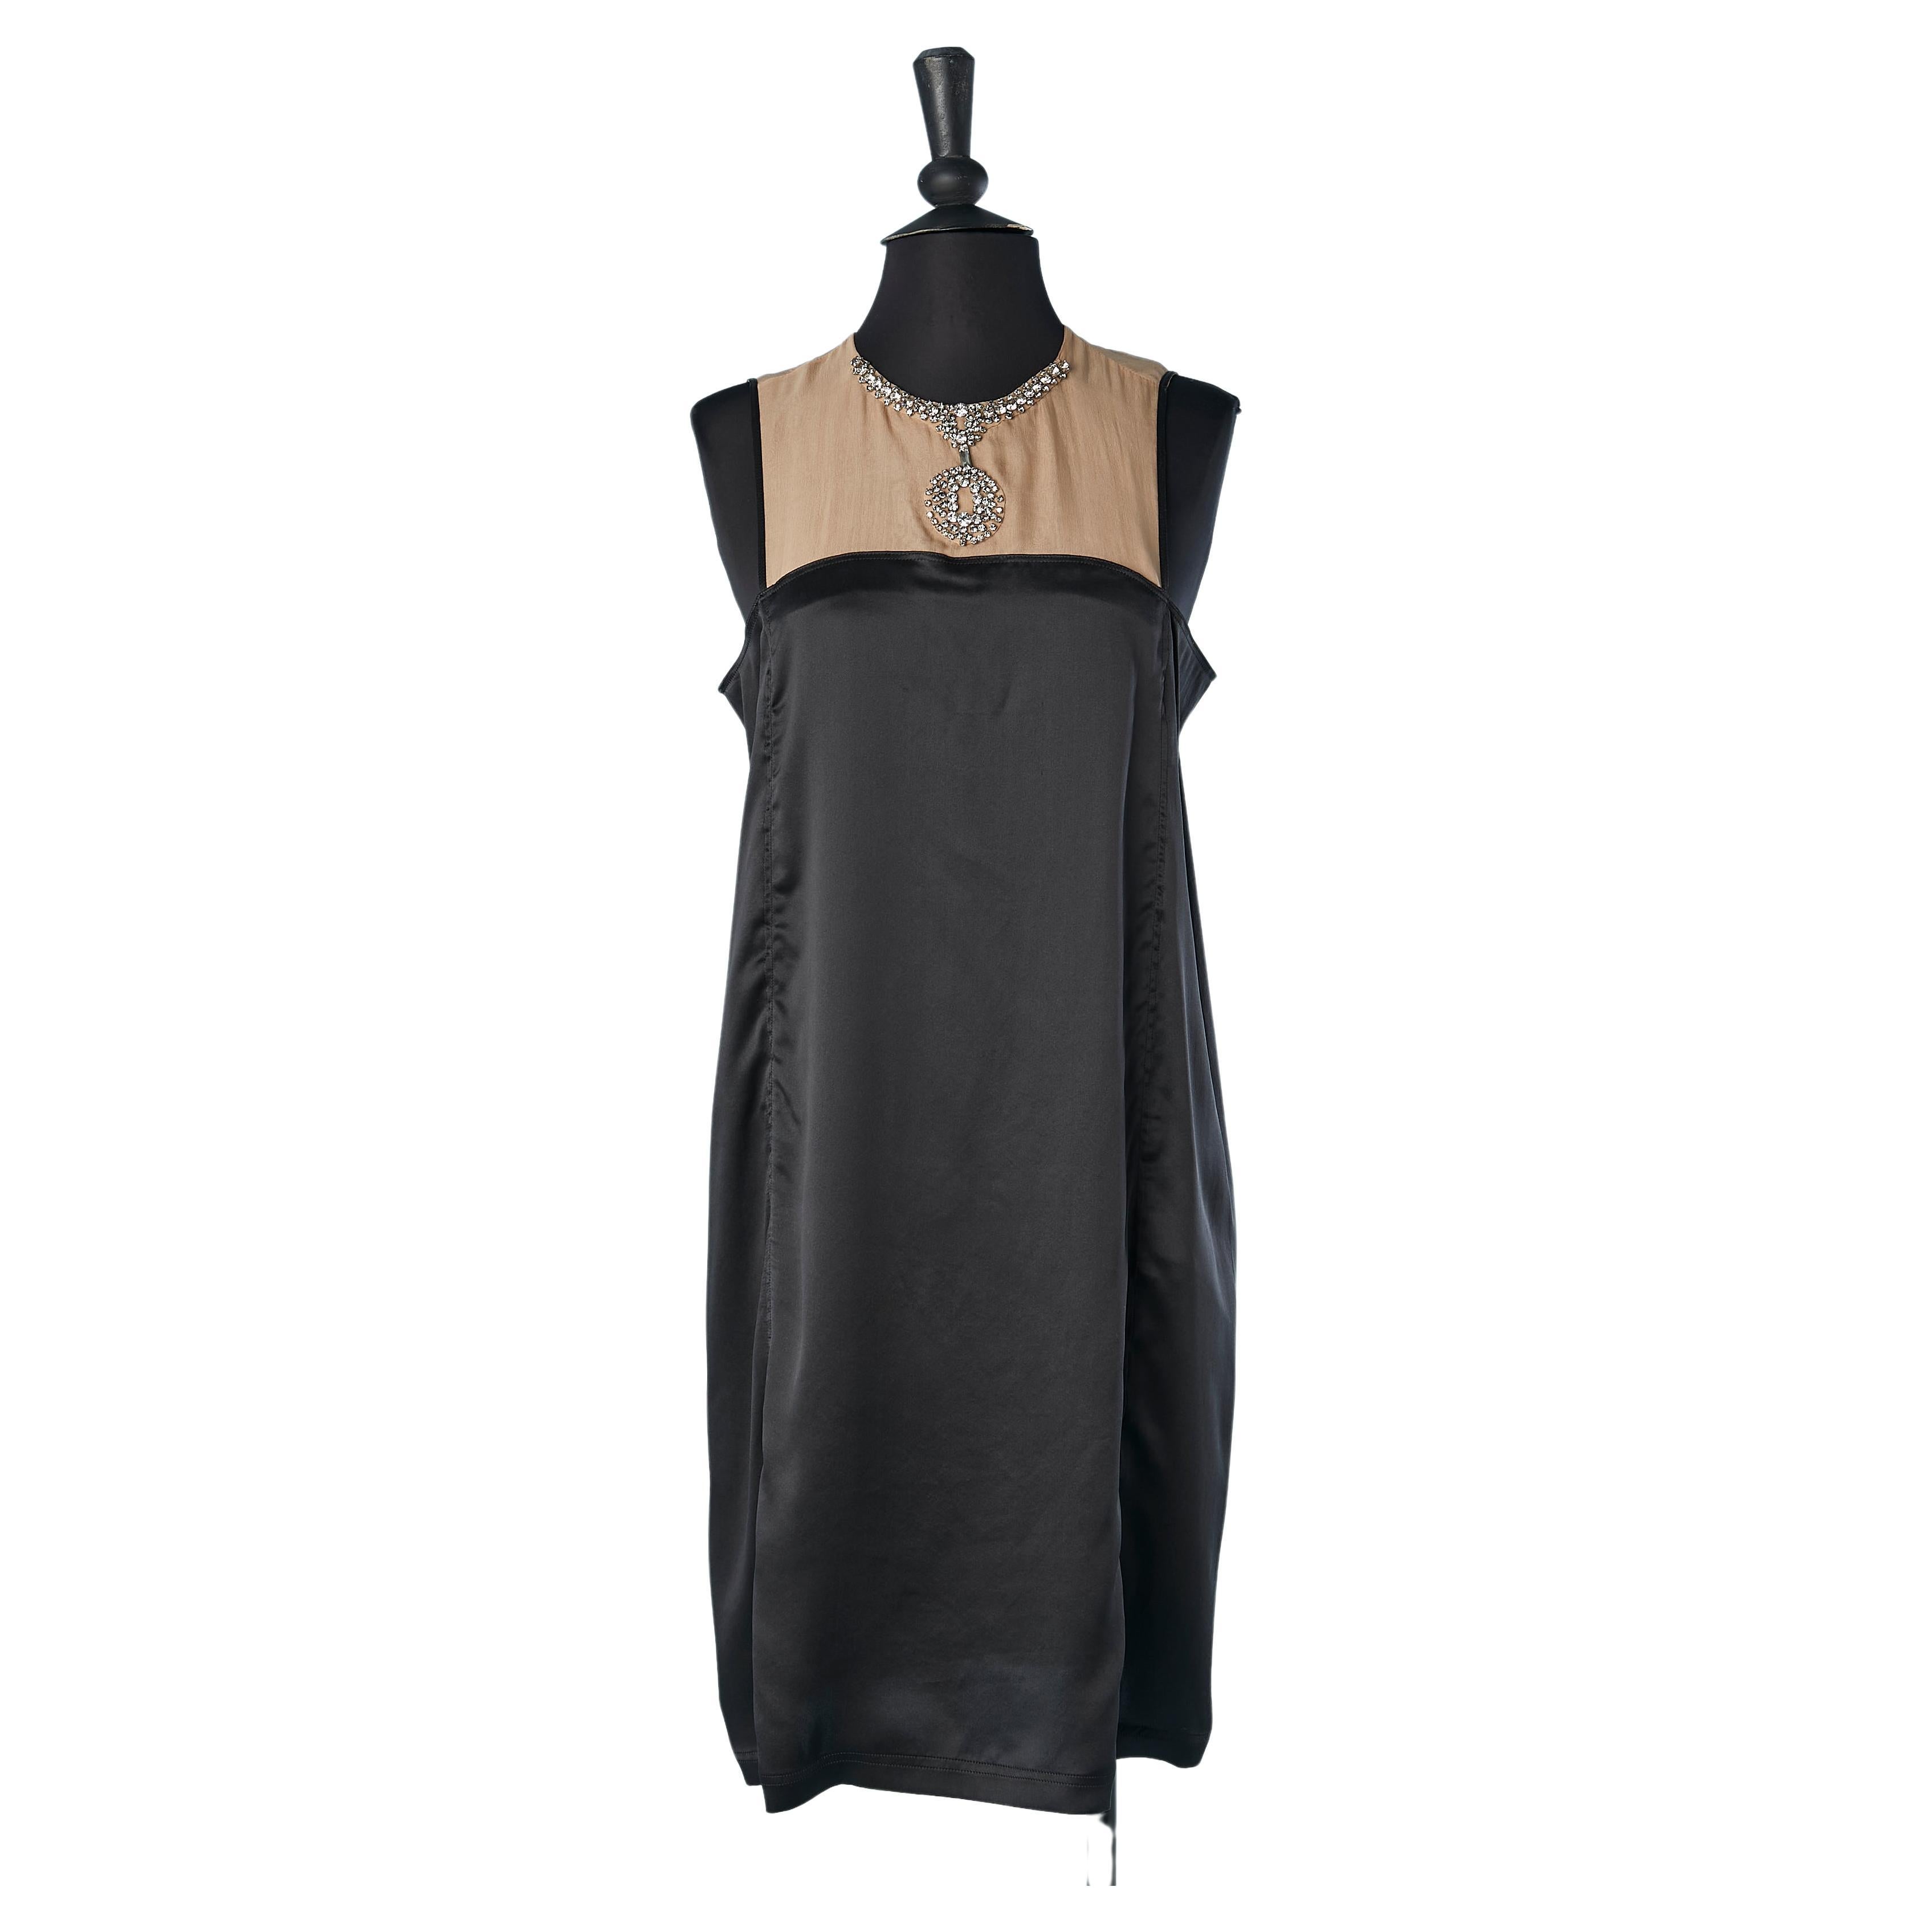  Silk and chiffon cocktail dress with rhinestone neckless Lanvin by Alber Elbaz 